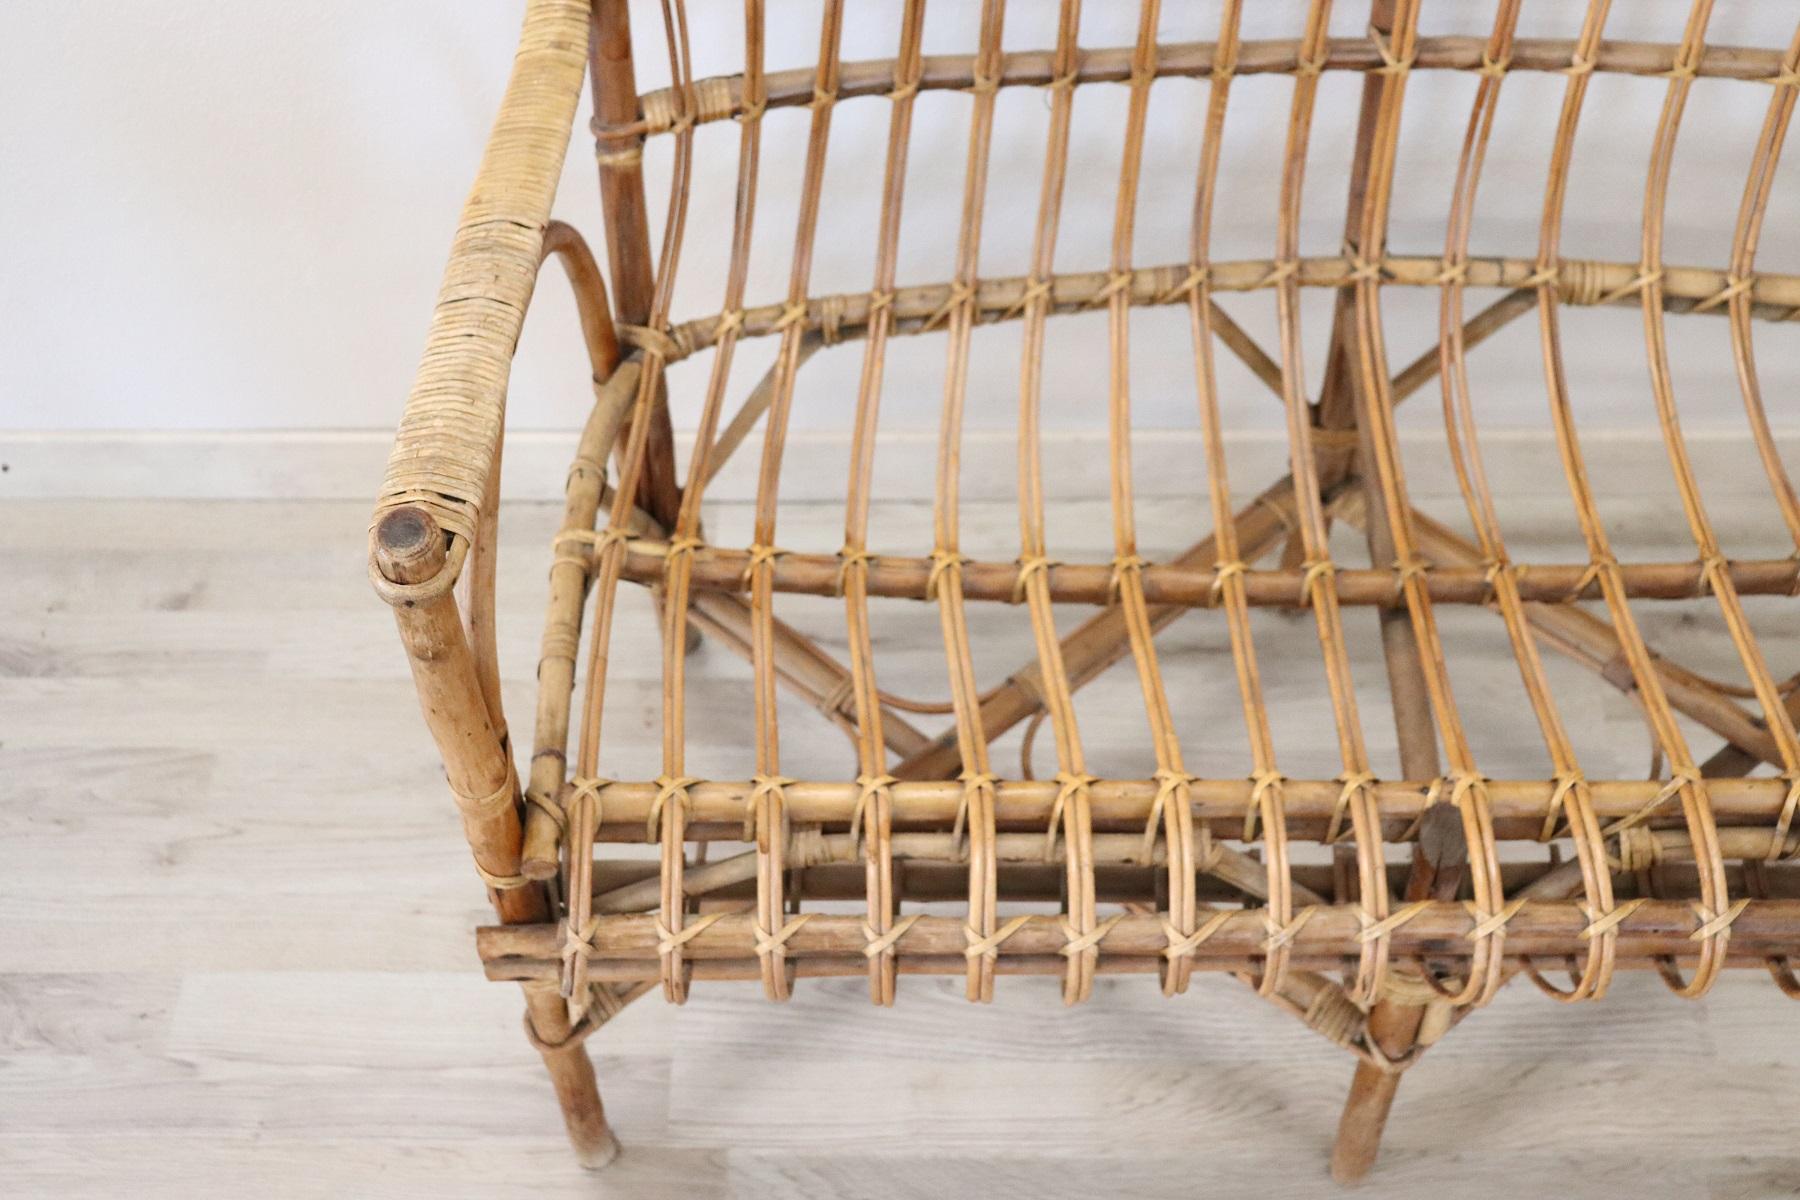 Rare Italian living room set of 4 pieces. The living room was made by Italian artisans around in 1960s. Completely made with bamboo and rattan woven with refined quality. This furniture is perfect for your patio or your garden in summer. The pillows